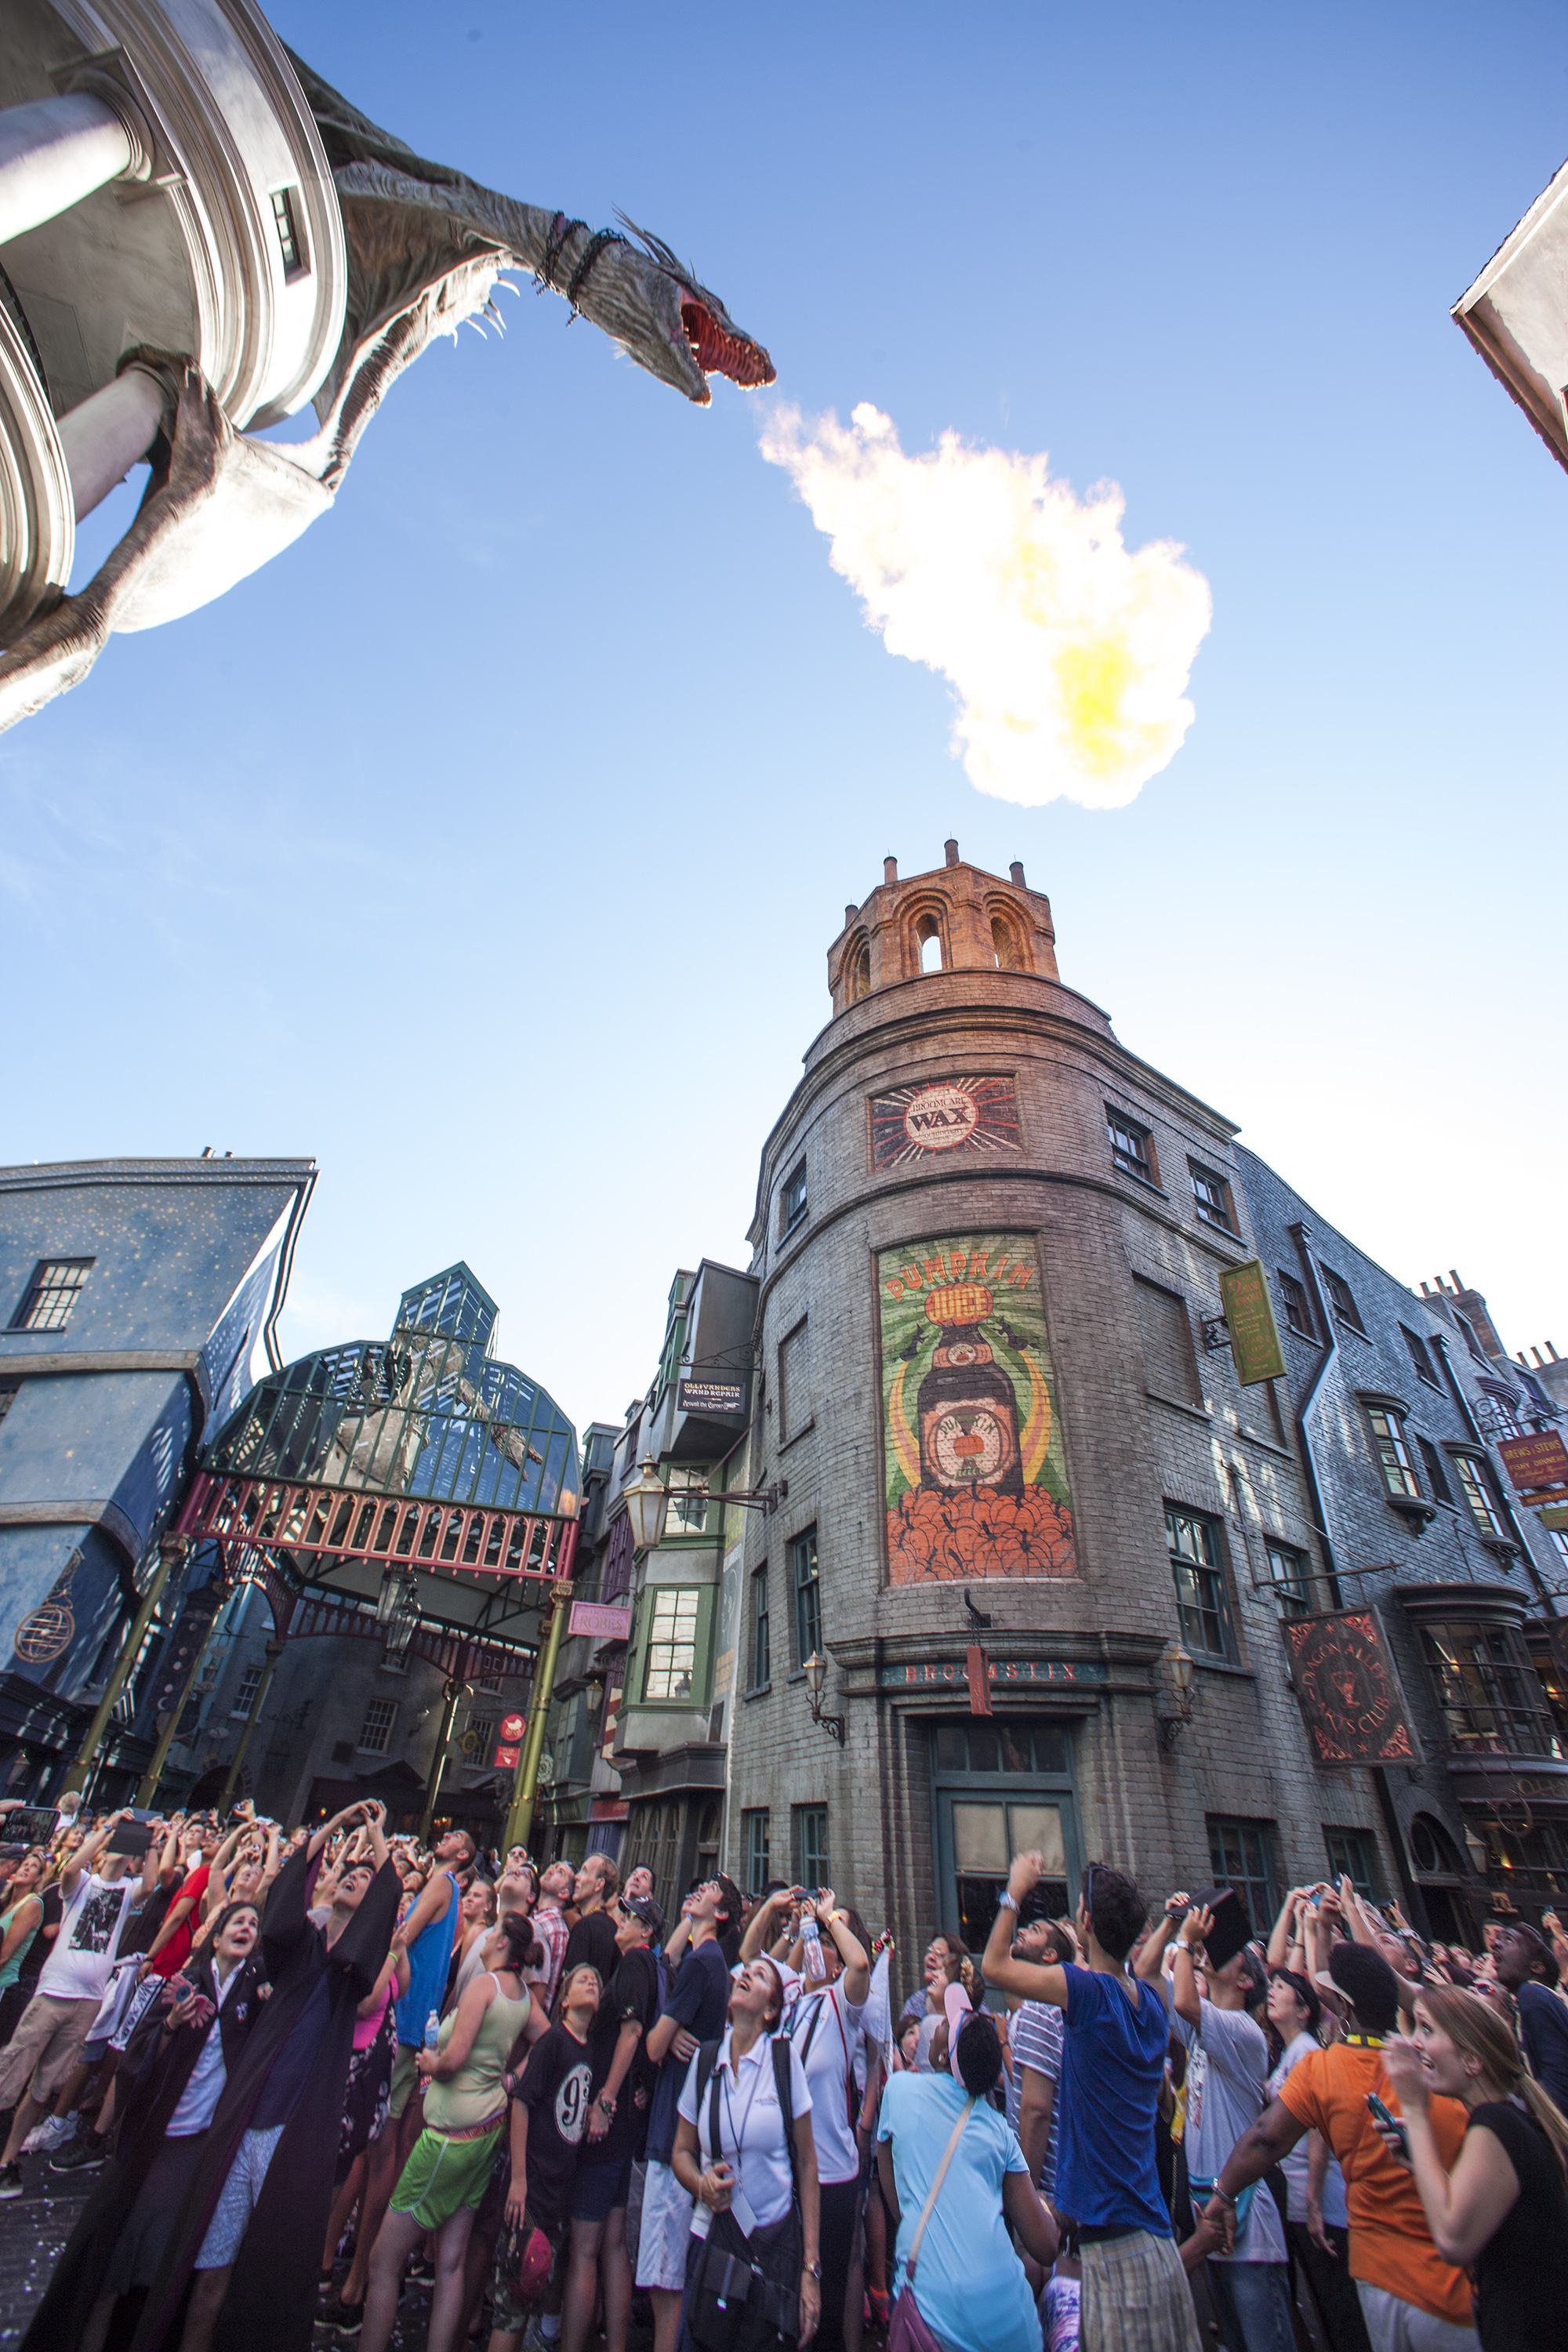 Universal Orlando Resort officially opened The Wizarding World of Harry Potter Ð Diagon Alley today, July 8, at Universal Studios Florida.